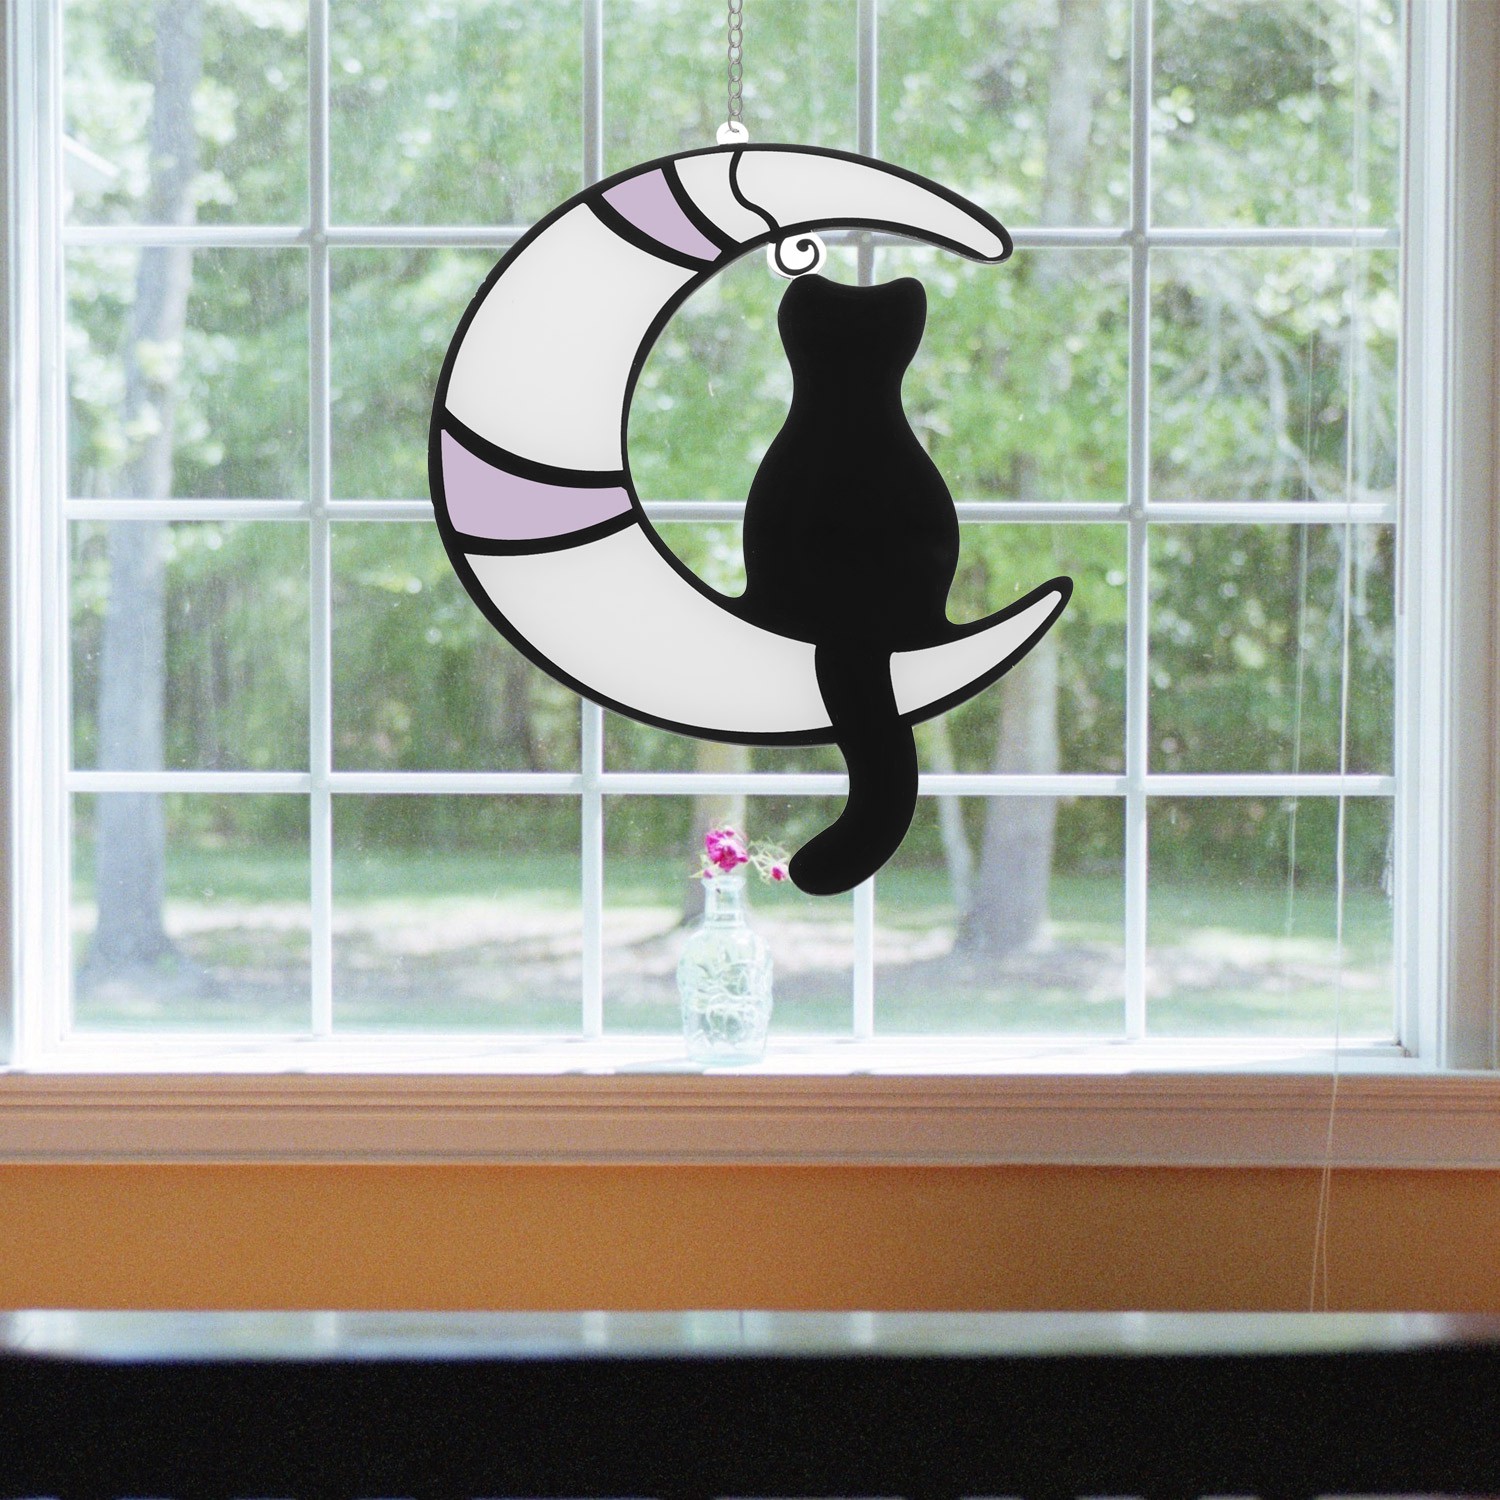 LUCKY Moon Stained Glass Cat Glasses Black Cats Sun Catchers Ornament Home Decor Window Hanging Suncatchers For Windows Cat Garden Decor/Multicolor